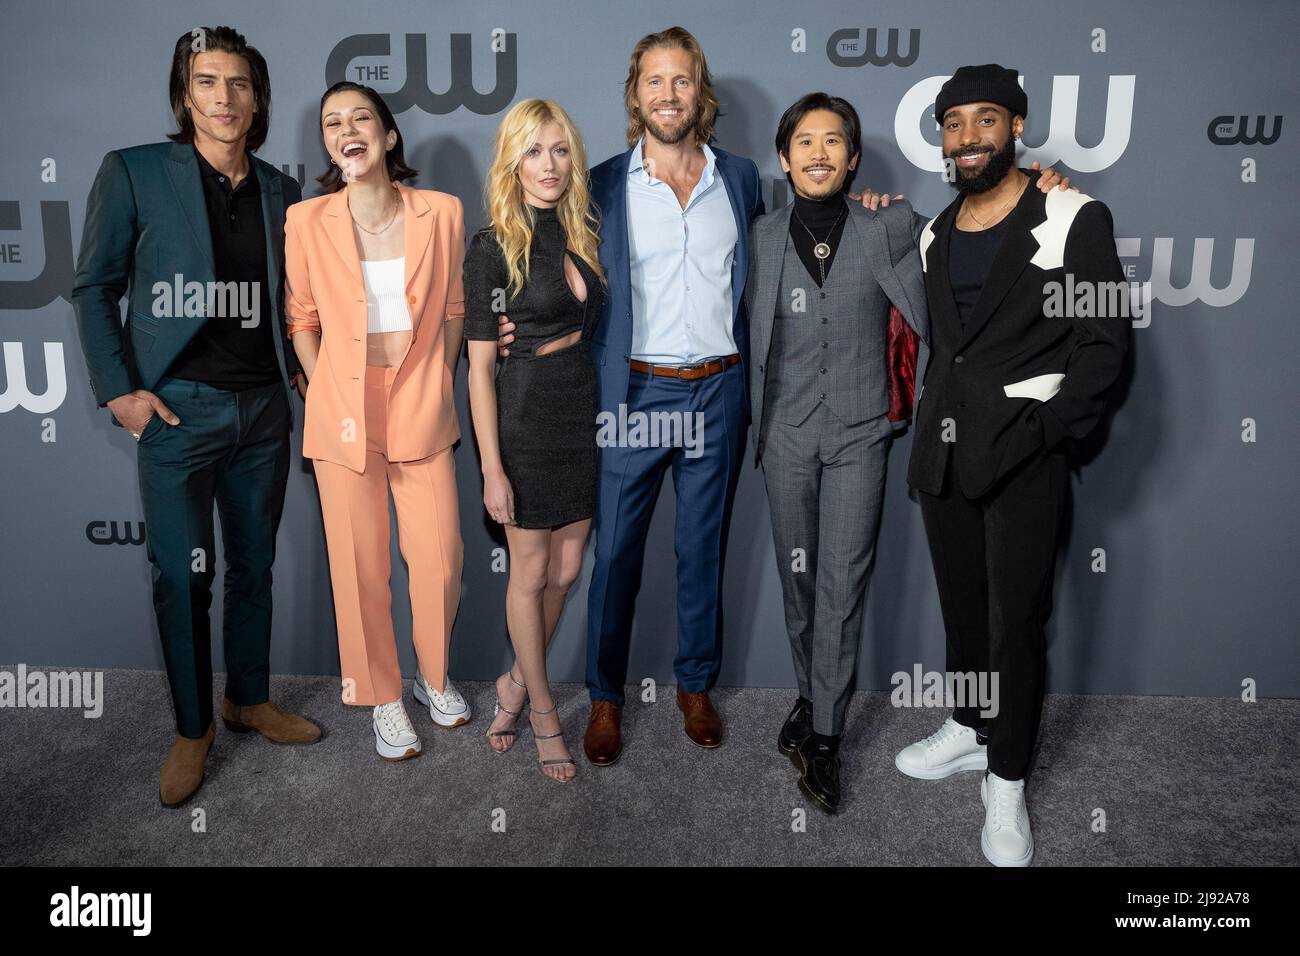 New York, USA. 18th May, 2022. (L-R) Justin Johnson Cortez, Katie Findlay, Katherine McNamara, Matt Barr, Lawrence Kao and Philemon Chambers attend The CW Networks's 2022 New York Upfront Presentation at New York City Center in New York, New York, on May 19, 2022. (Photo by Gabriele Holtermann/Sipa USA) Credit: Sipa USA/Alamy Live News Stock Photo